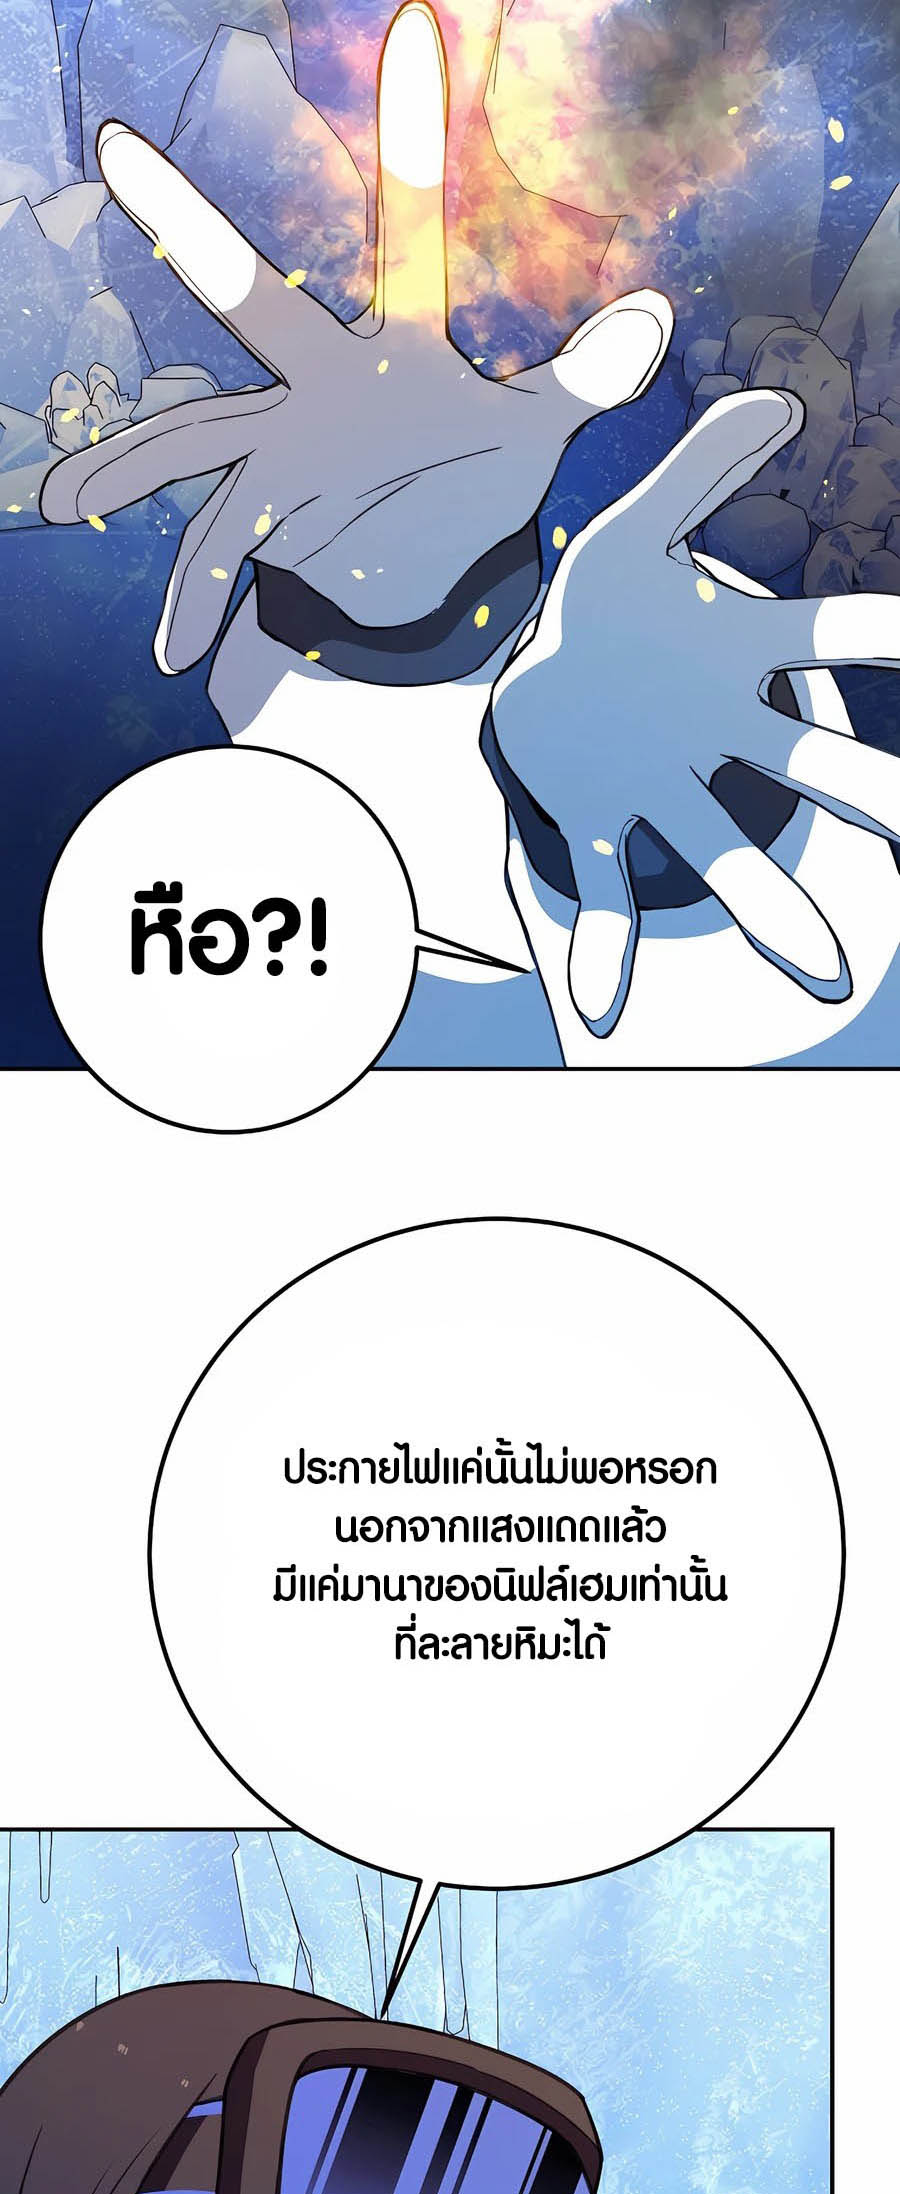 à¸­à¹ˆà¸²à¸™à¸¡à¸±à¸™à¸®à¸§à¸² à¹€à¸£à¸·à¹ˆà¸­à¸‡ The Part Time Land of the Gods 57 50